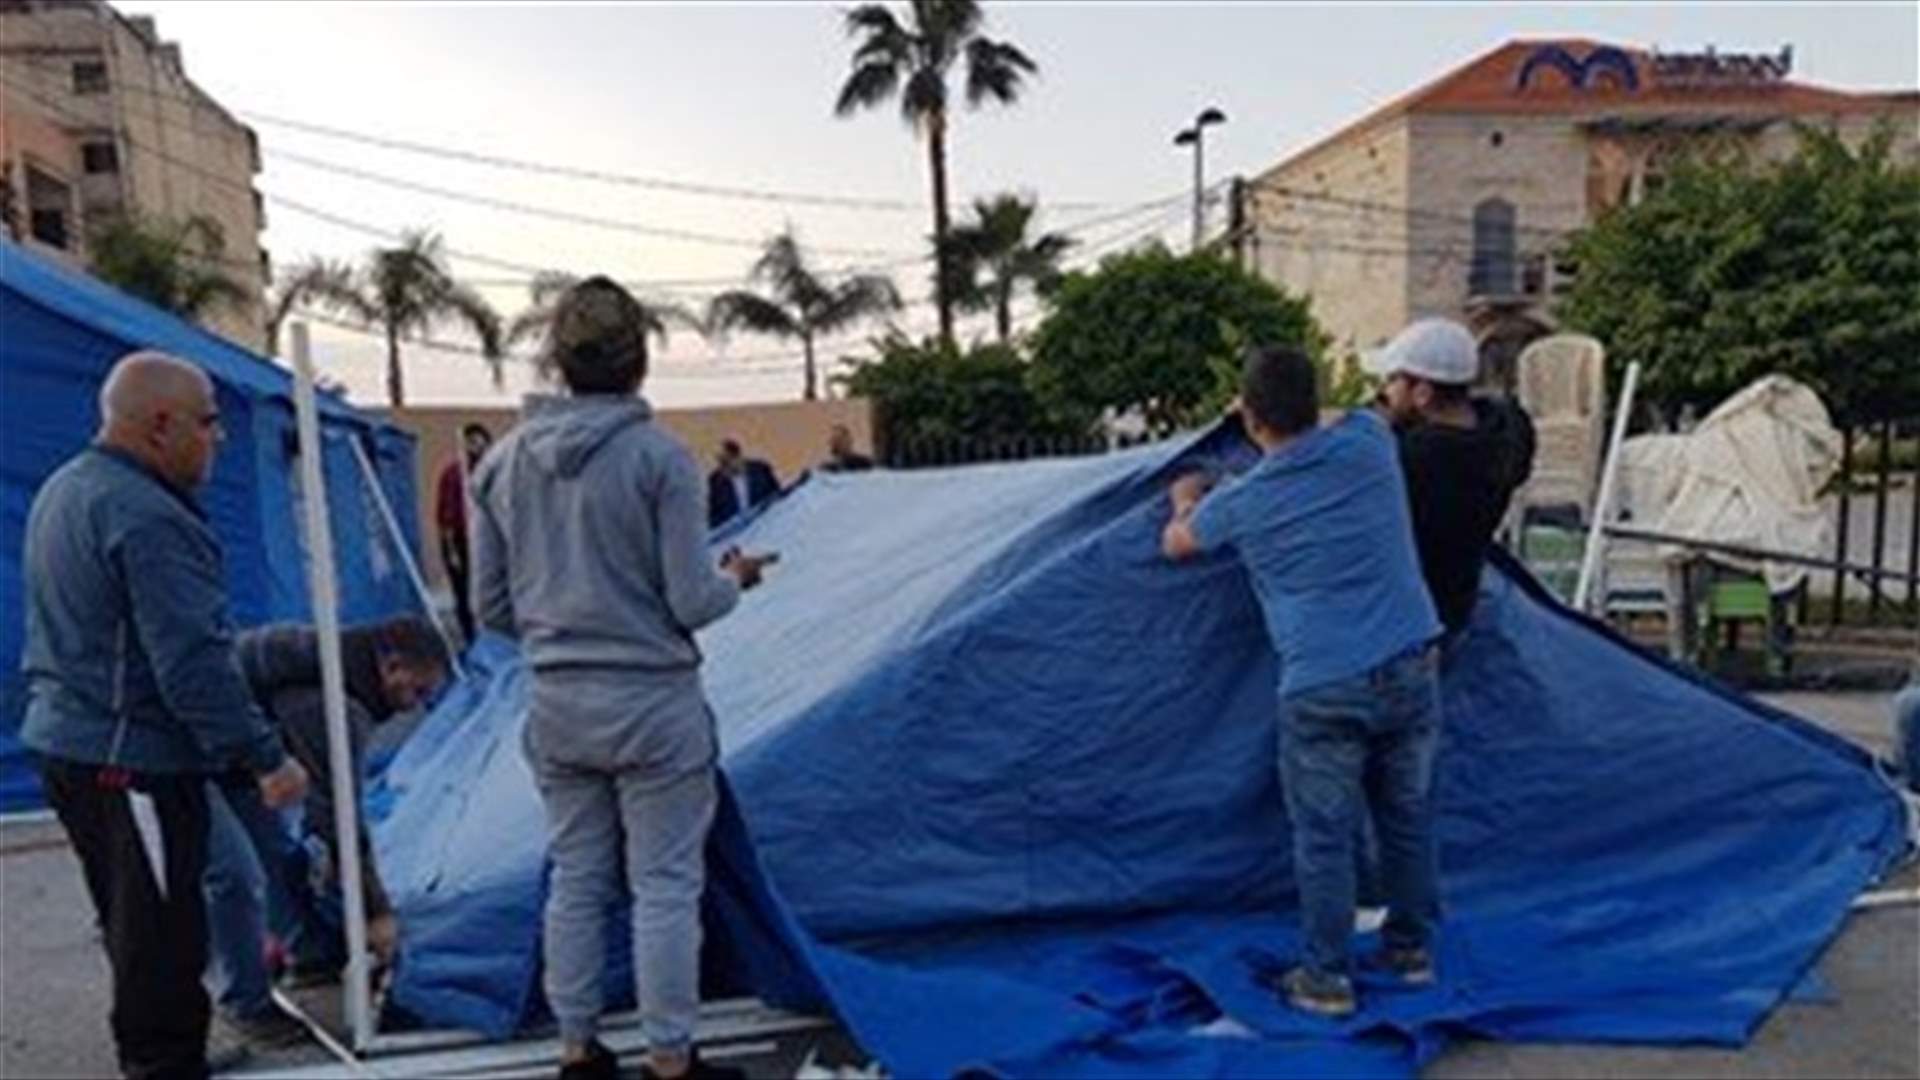 Unknown persons shoot at protesters tents in Jounieh-[PHOTO]